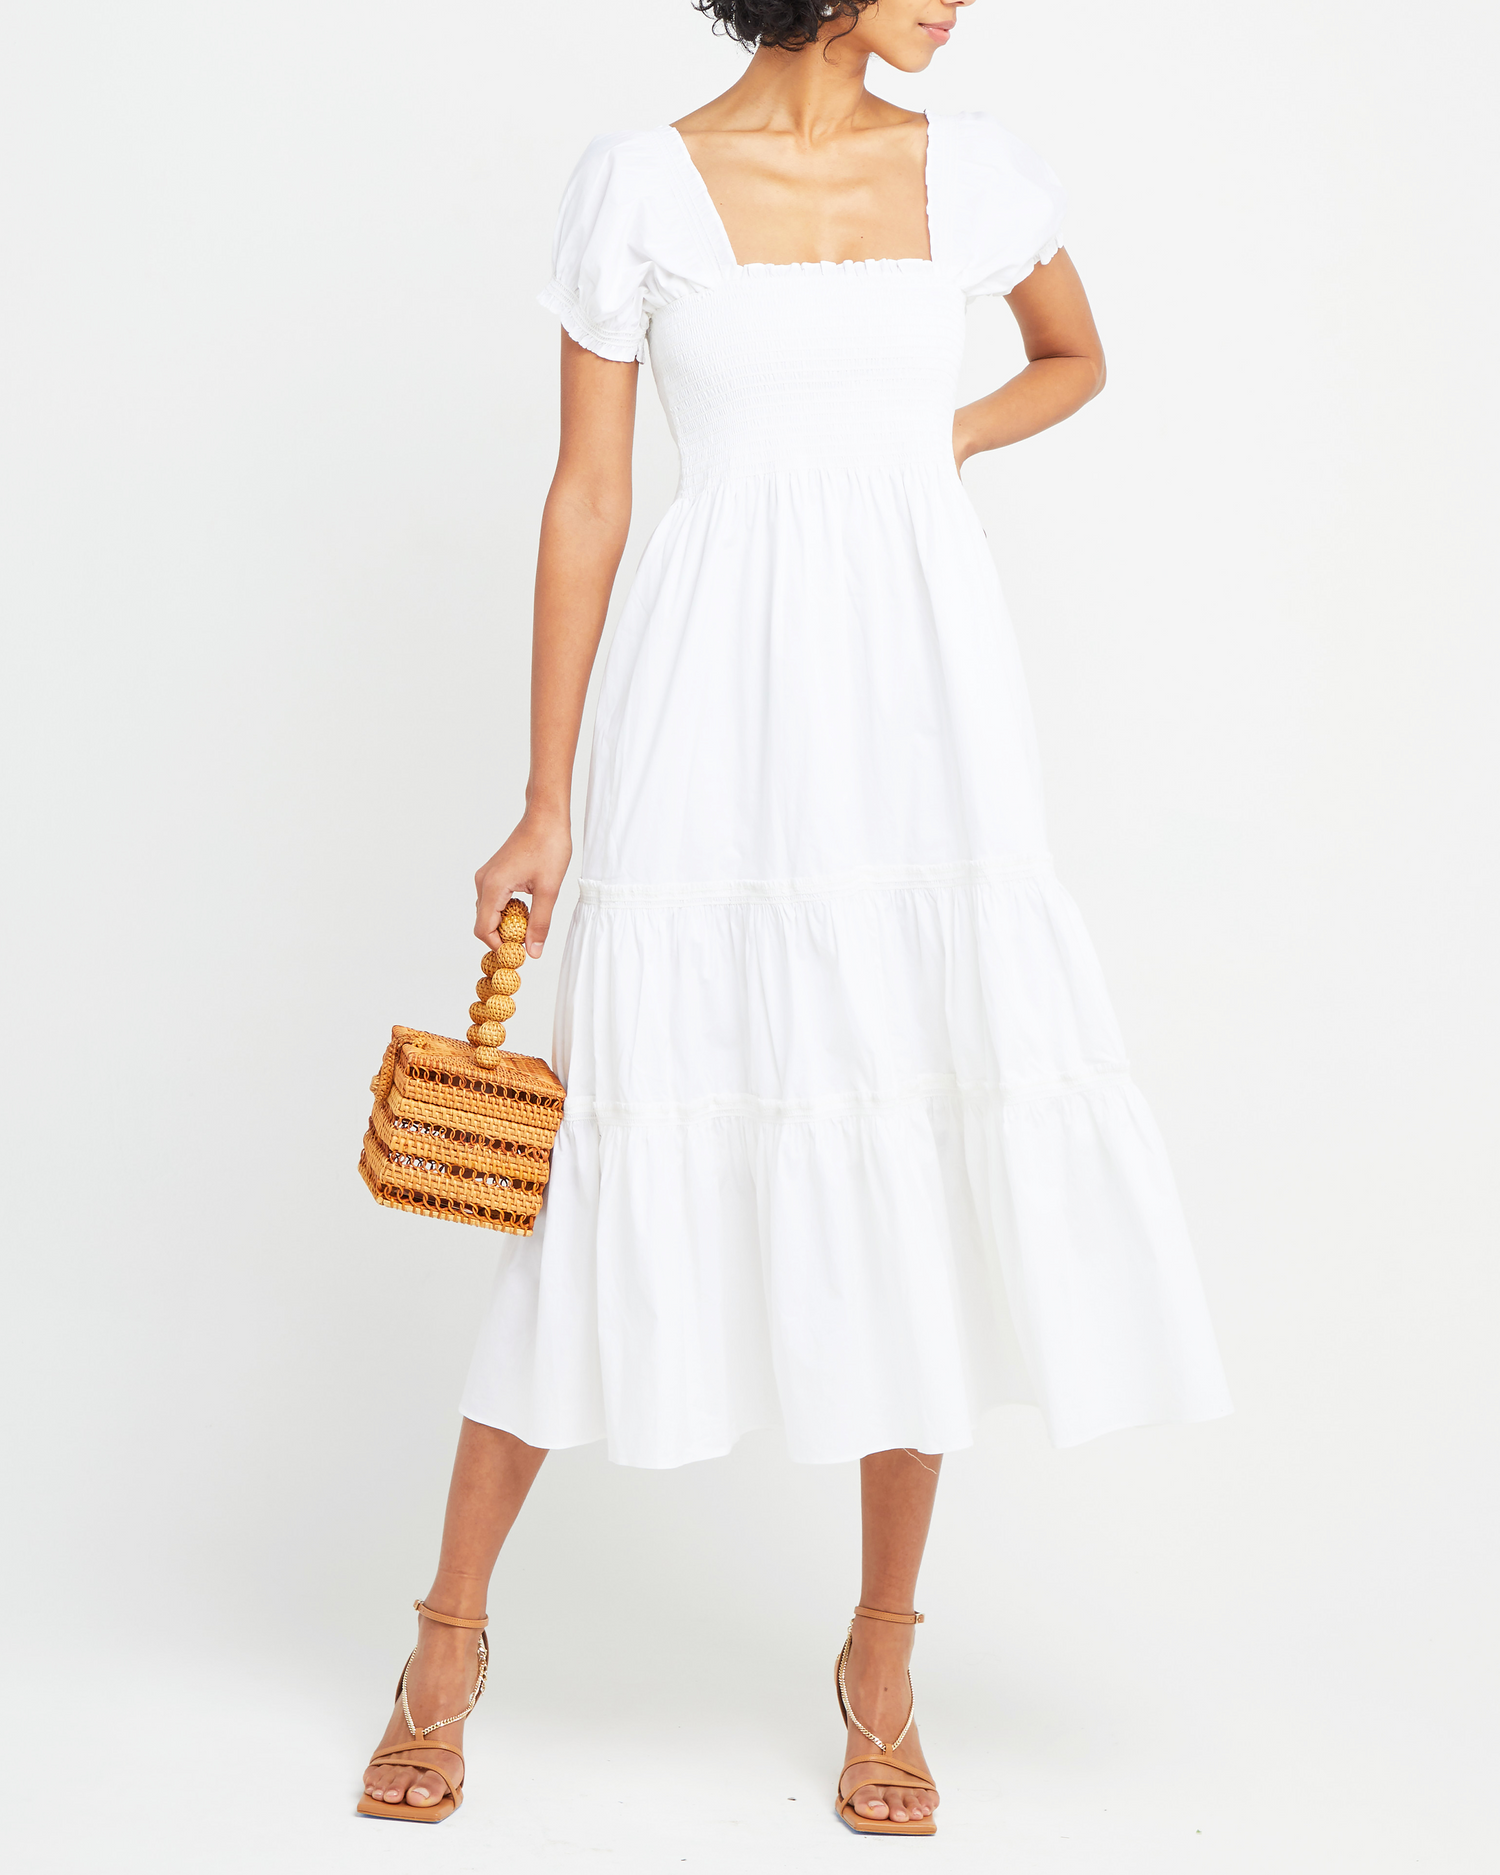 Fourth image of Square Neck Smocked Maxi Dress, a white maxi dress, smocked, puff sleeves, short sleeves